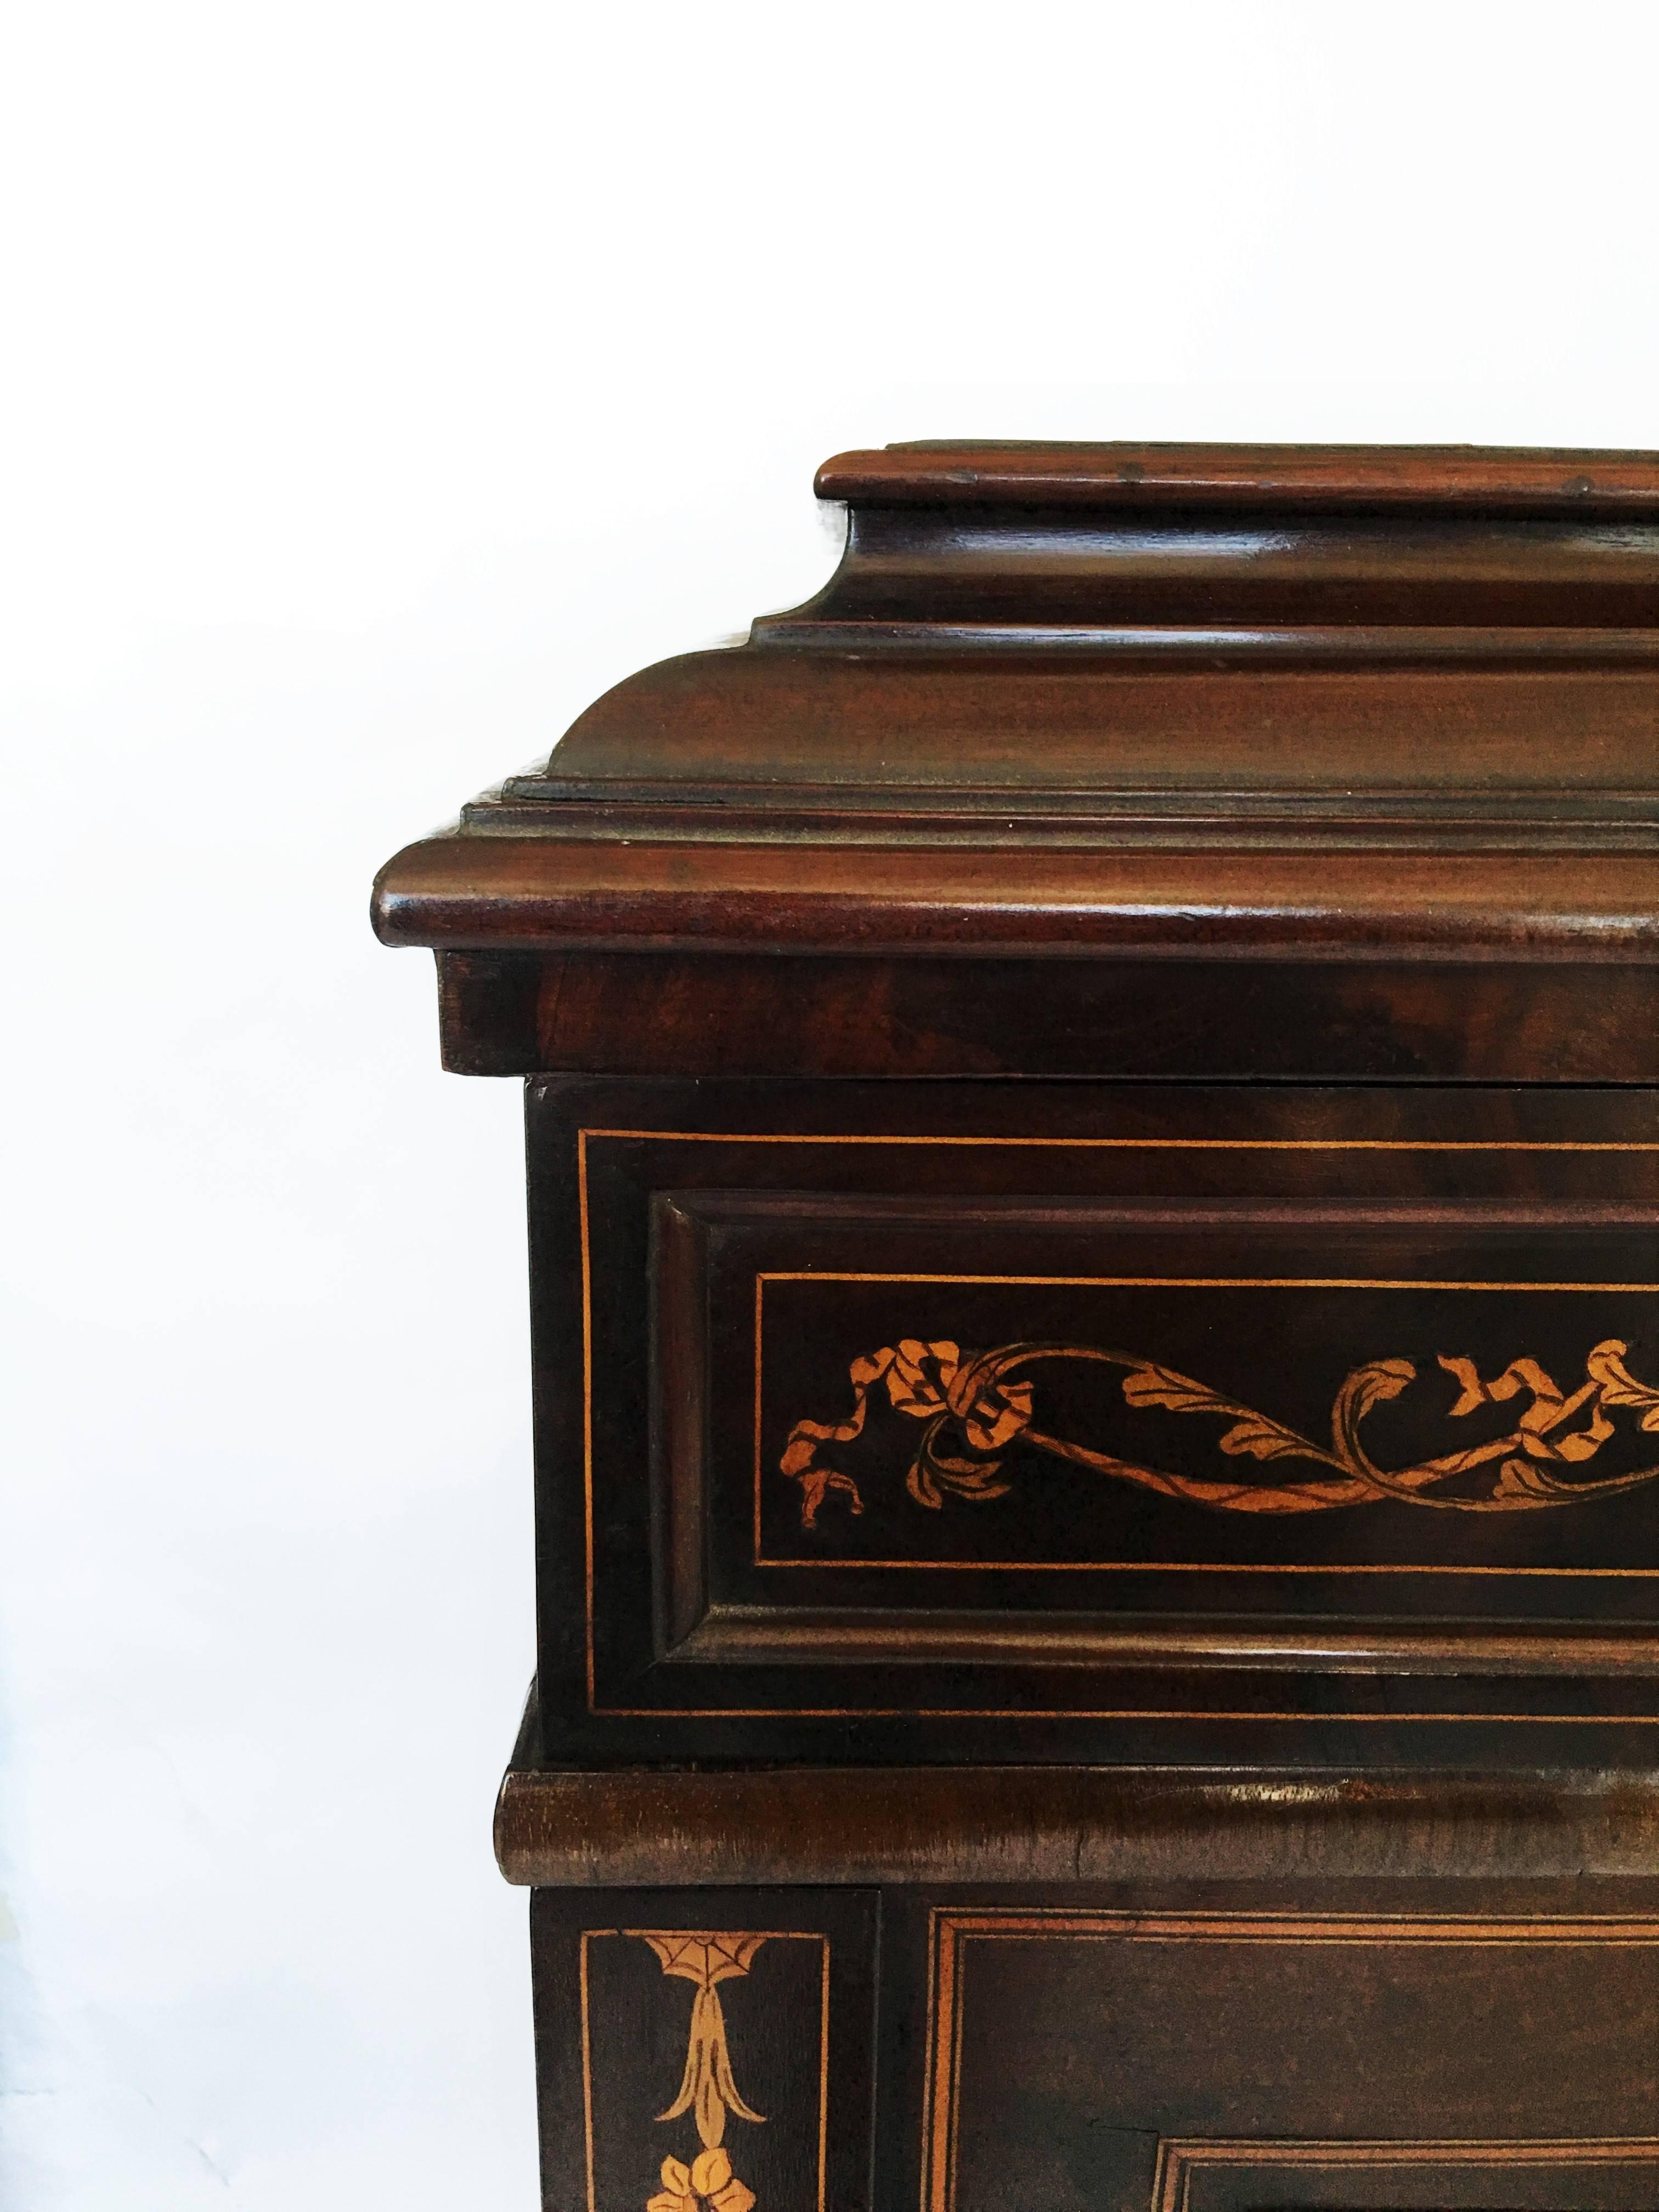 Early 19th Century Regency Marquetry Inlaid Rosewood Pedestal Sideboard with Urn For Sale 6